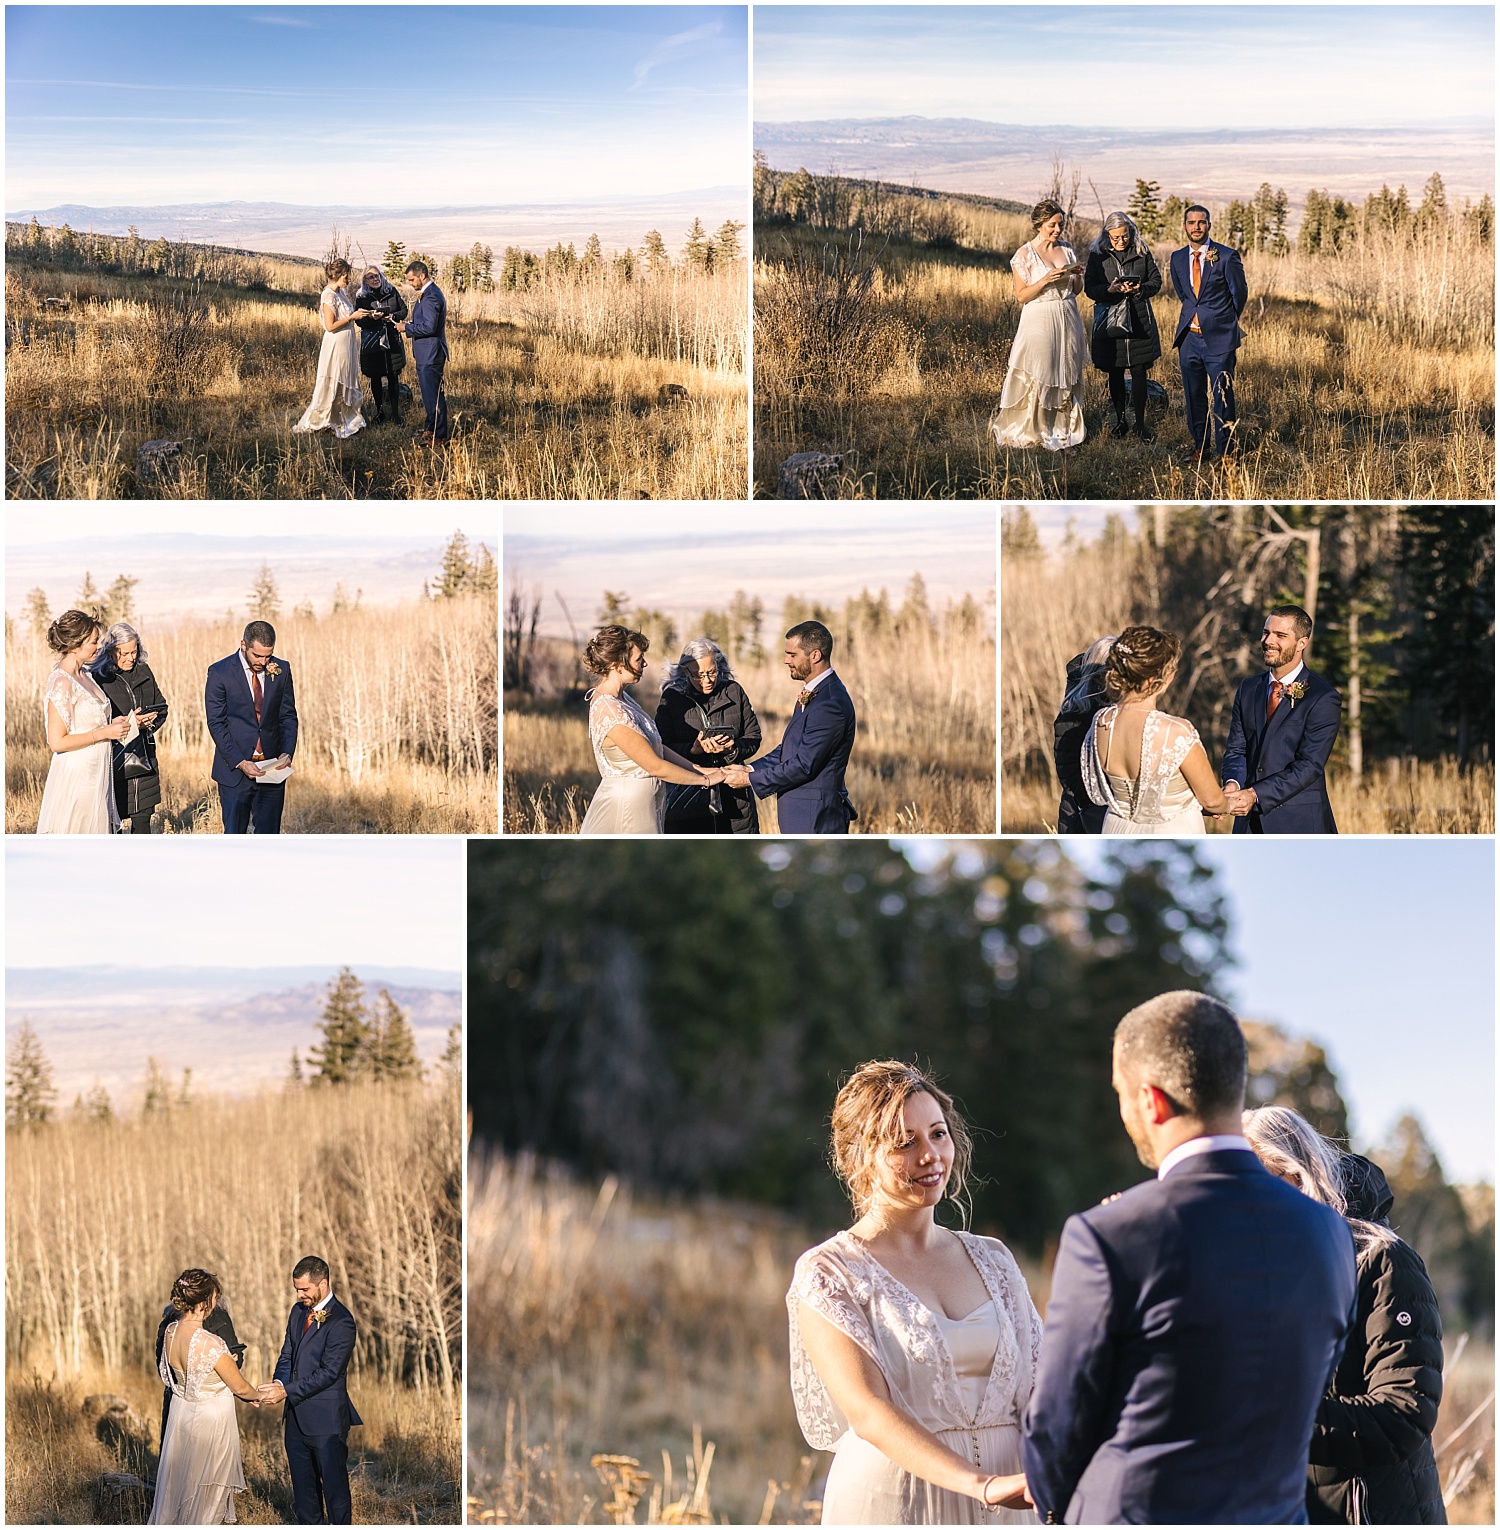 Winter elopement ceremony in the Sandia Mountains